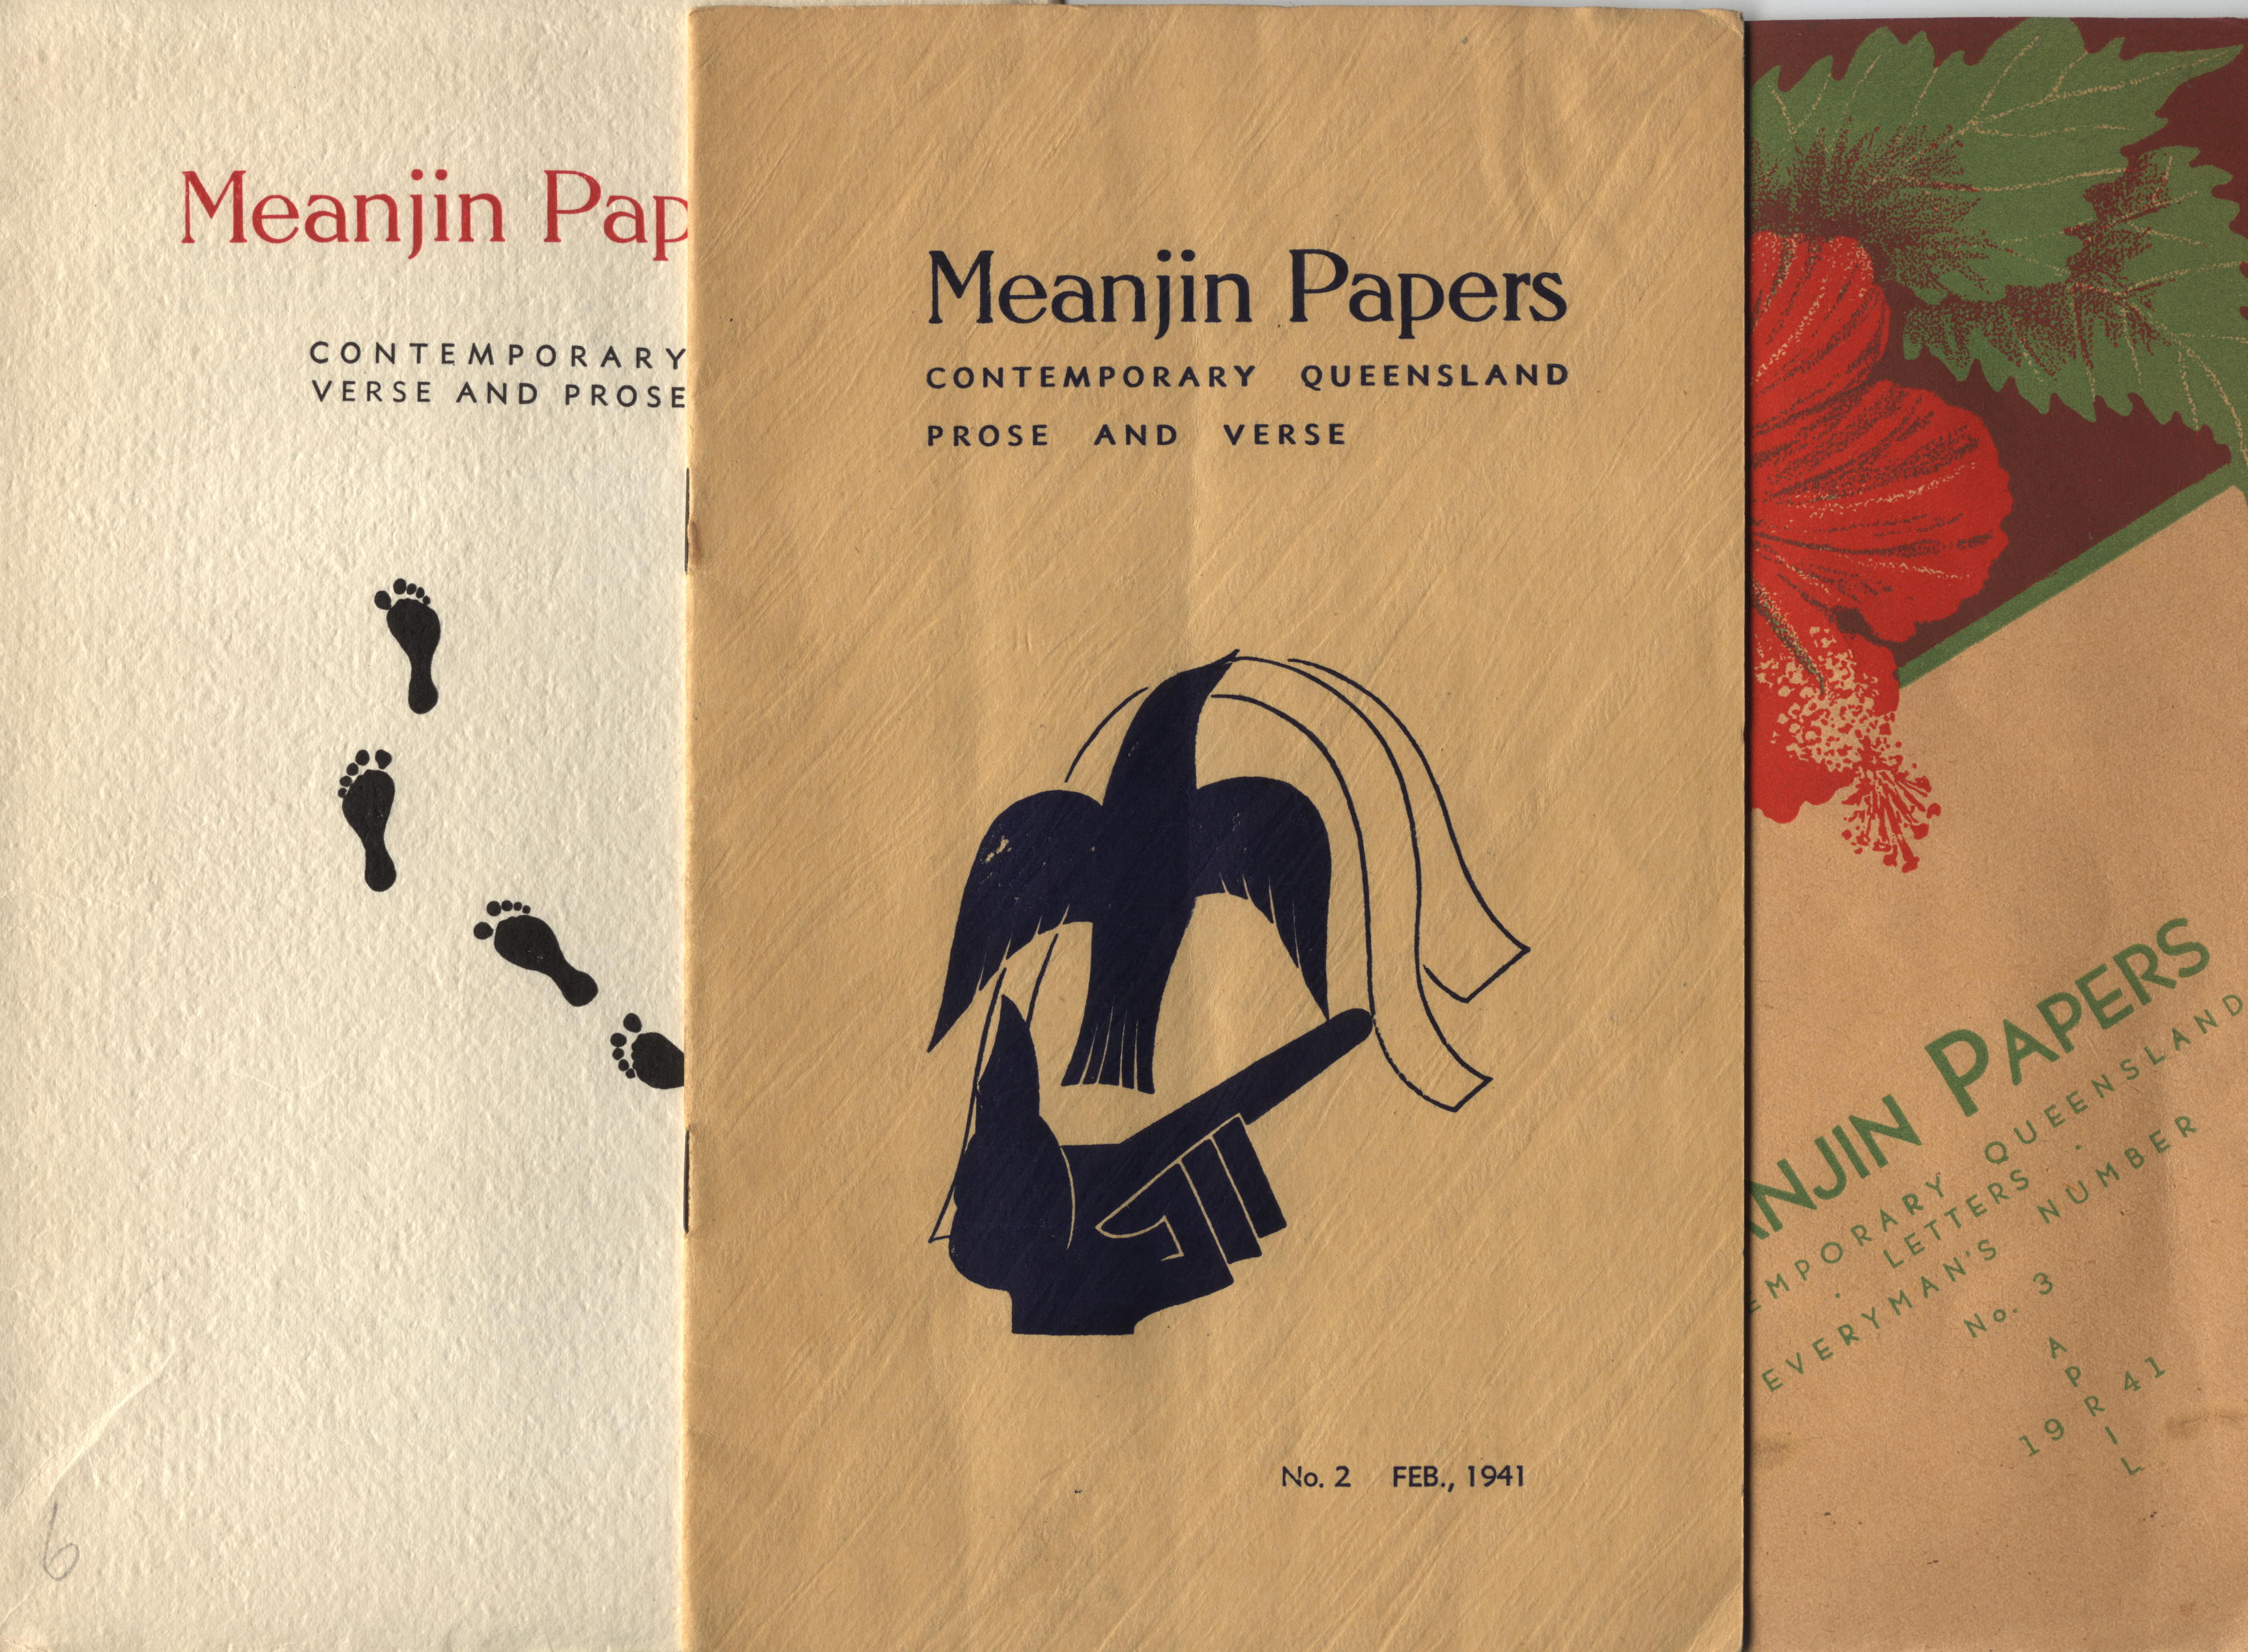 Early Meanjin covers